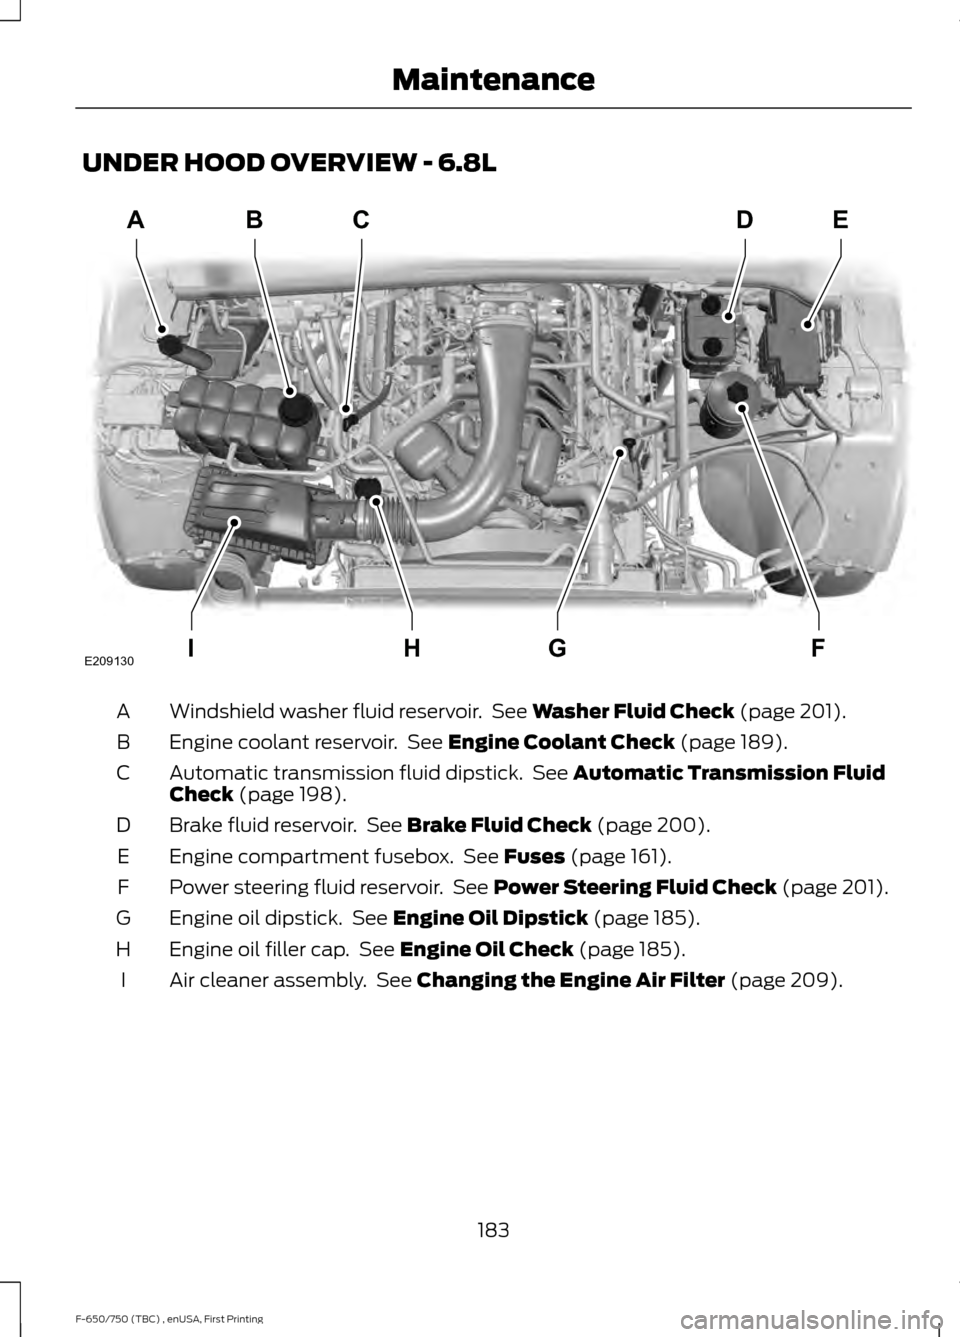 FORD F650 2017 13.G Owners Manual UNDER HOOD OVERVIEW - 6.8L
Windshield washer fluid reservoir.  See Washer Fluid Check (page 201).
A
Engine coolant reservoir.  See 
Engine Coolant Check (page 189).
B
Automatic transmission fluid dips